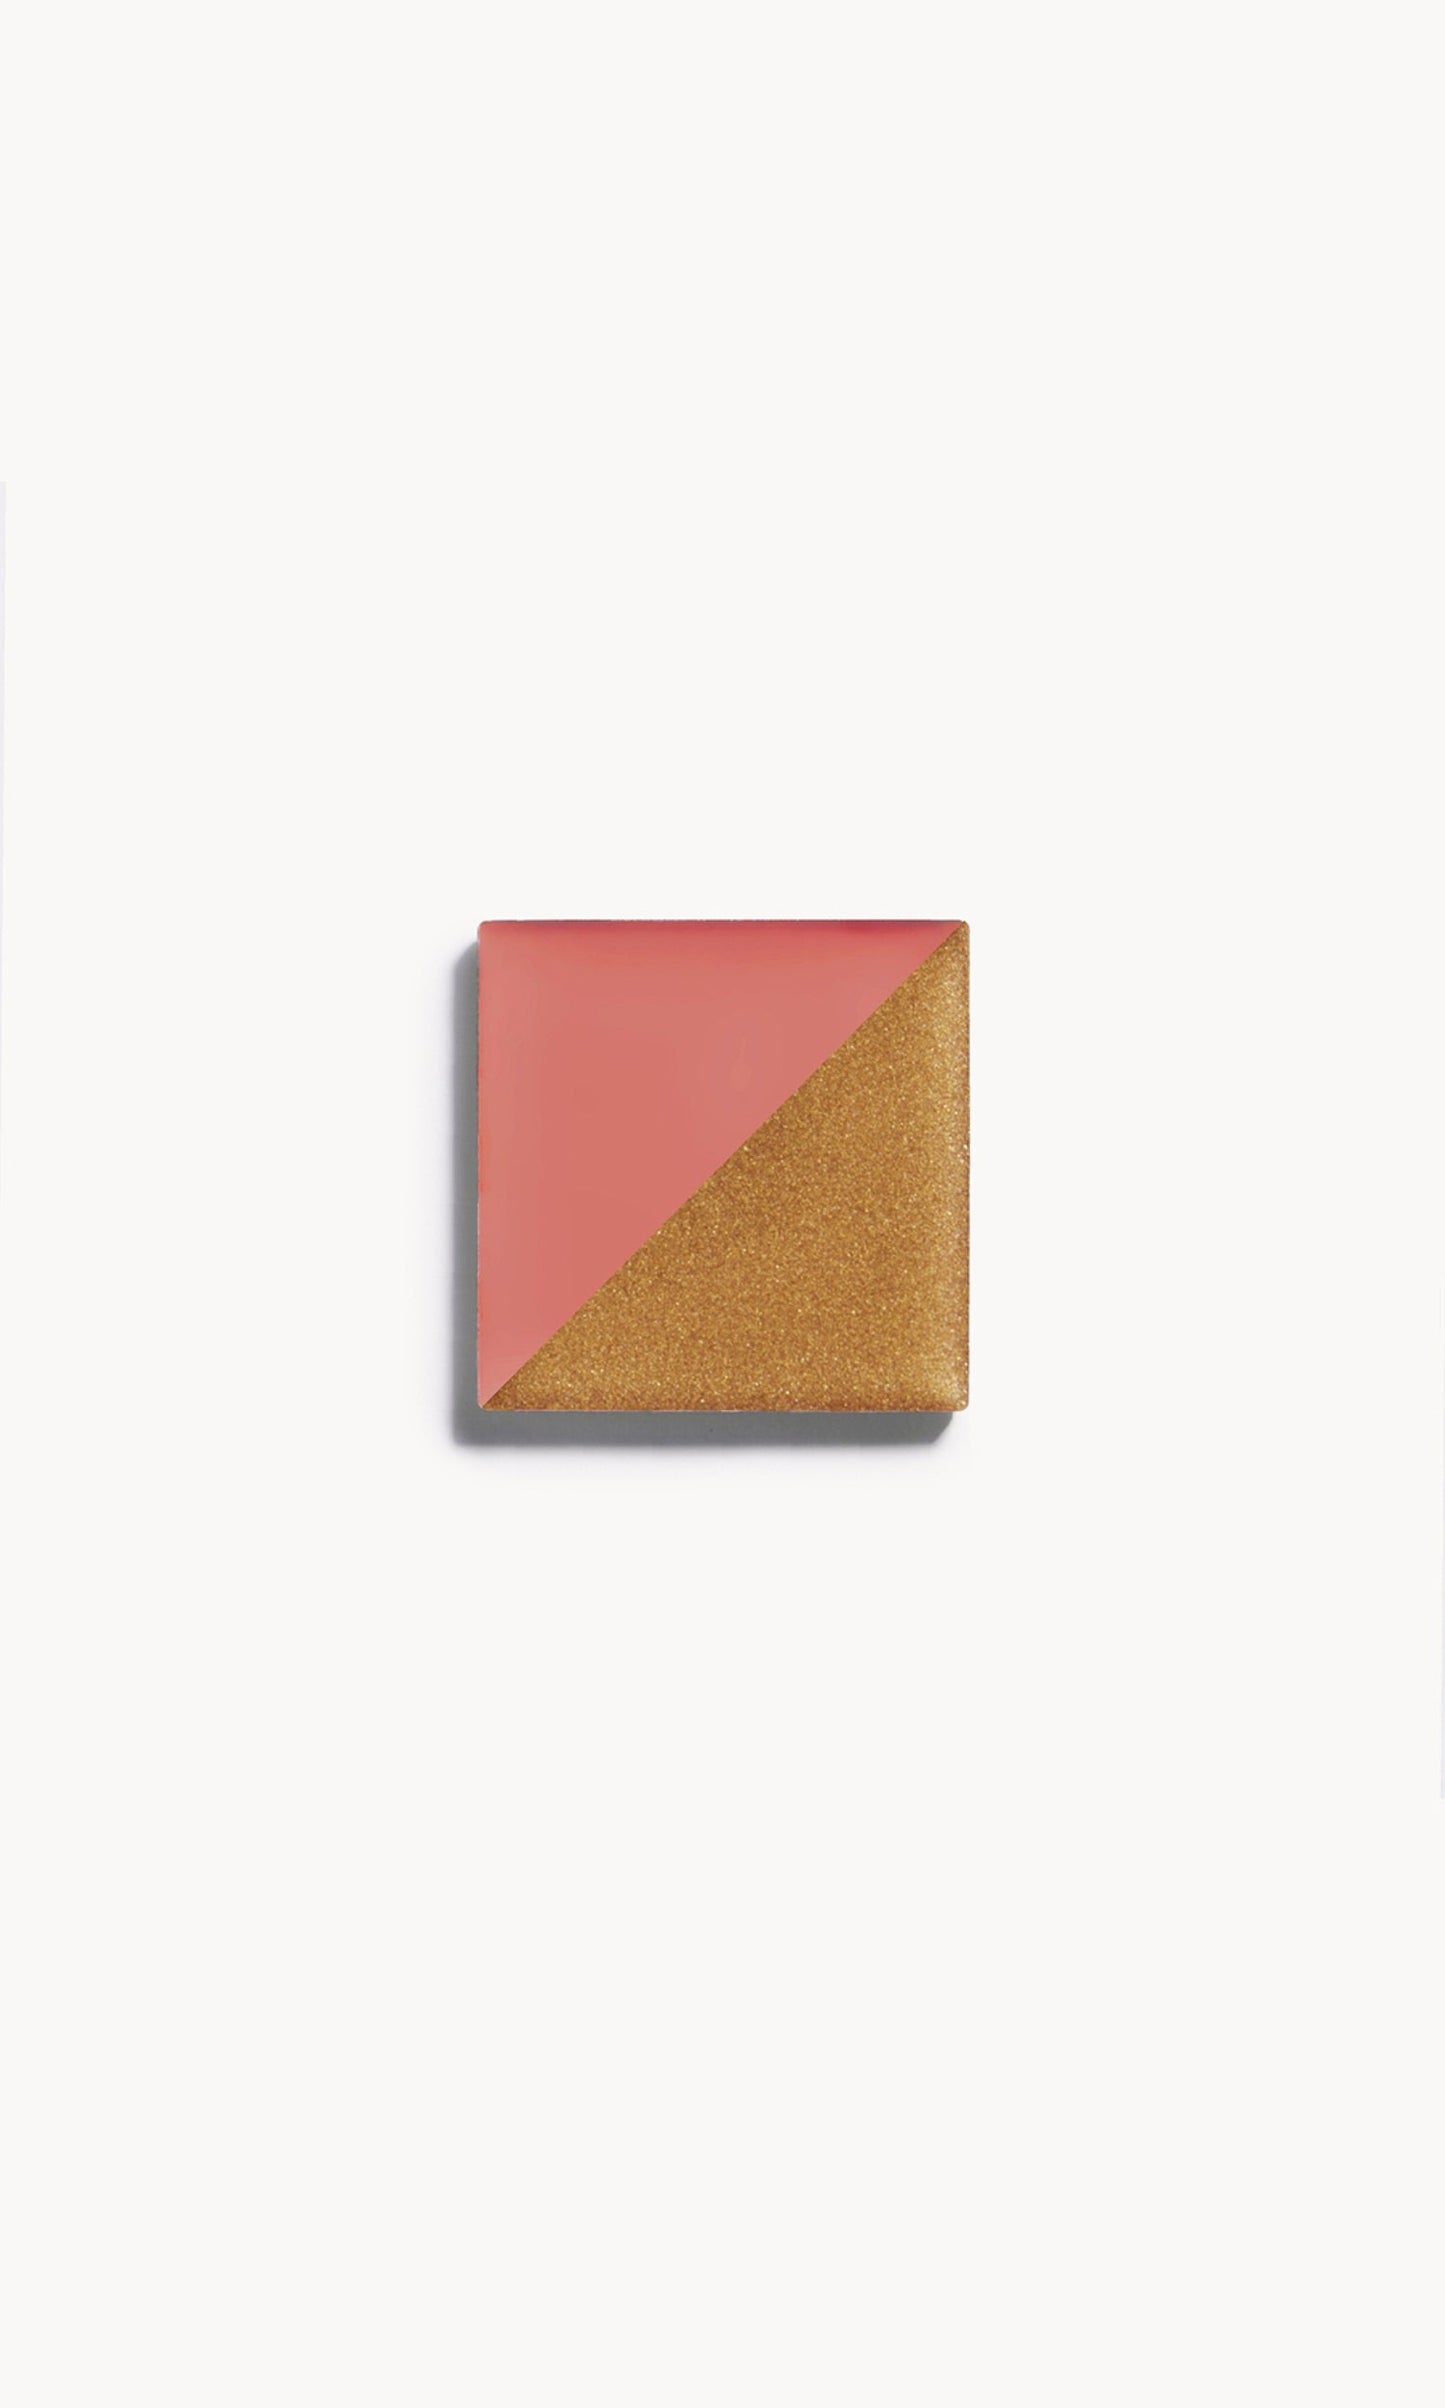 A square of warm pink cream blush and golden cream bronzer, split diagonally with a shade on each side